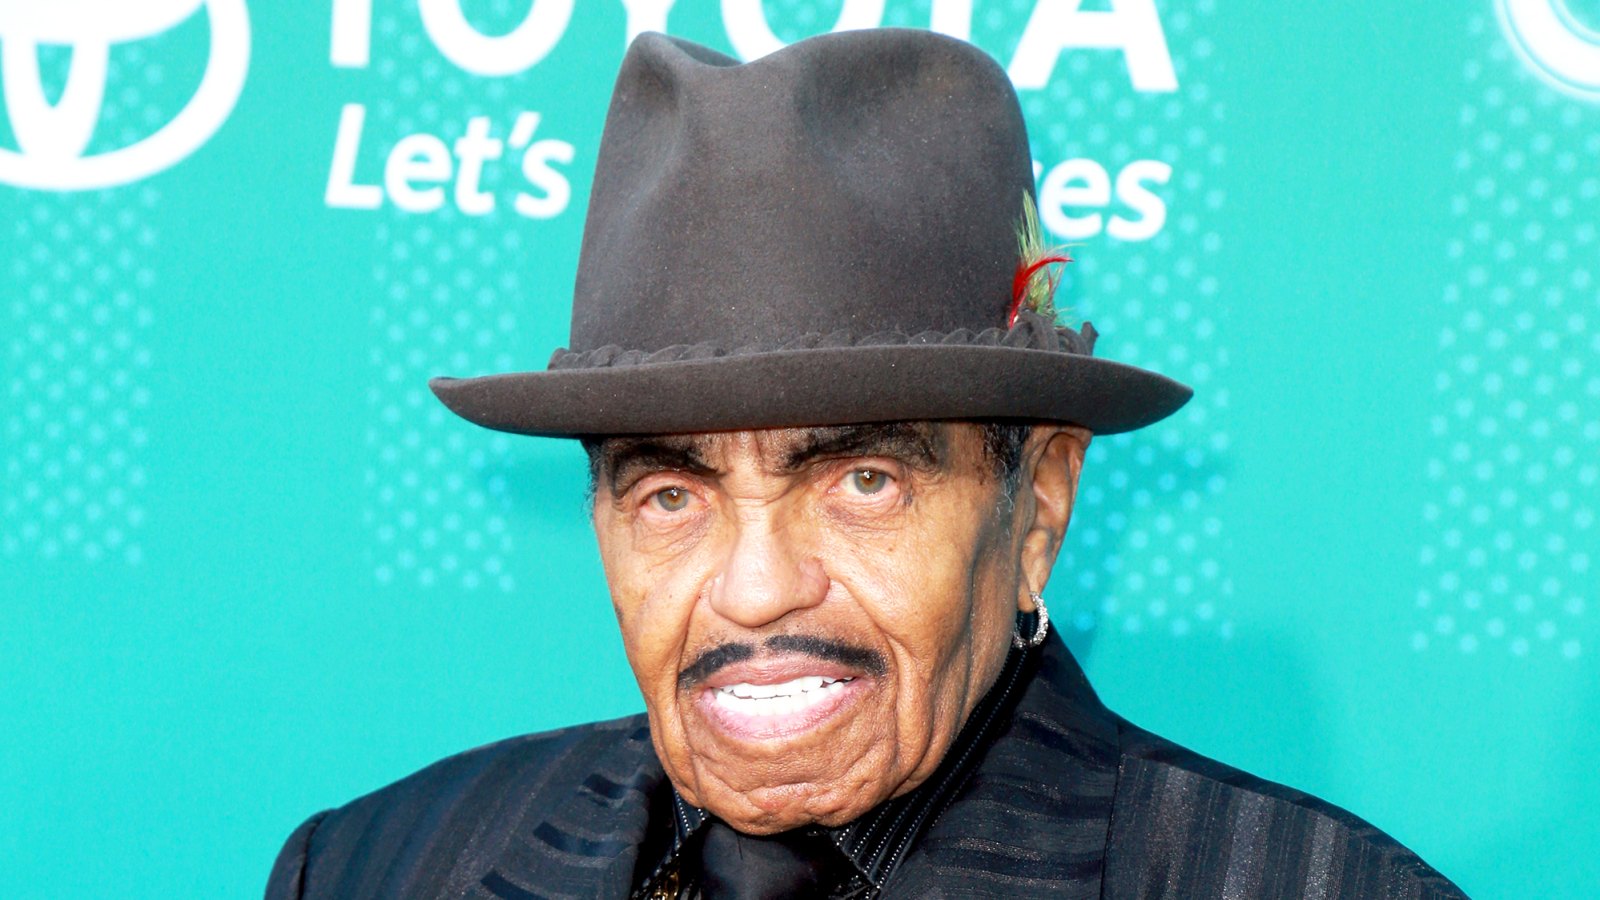 Joe Jackson attends the 2017 Soul Train Awards, presented by BET at the Orleans Arena in Las Vegas, Nevada.